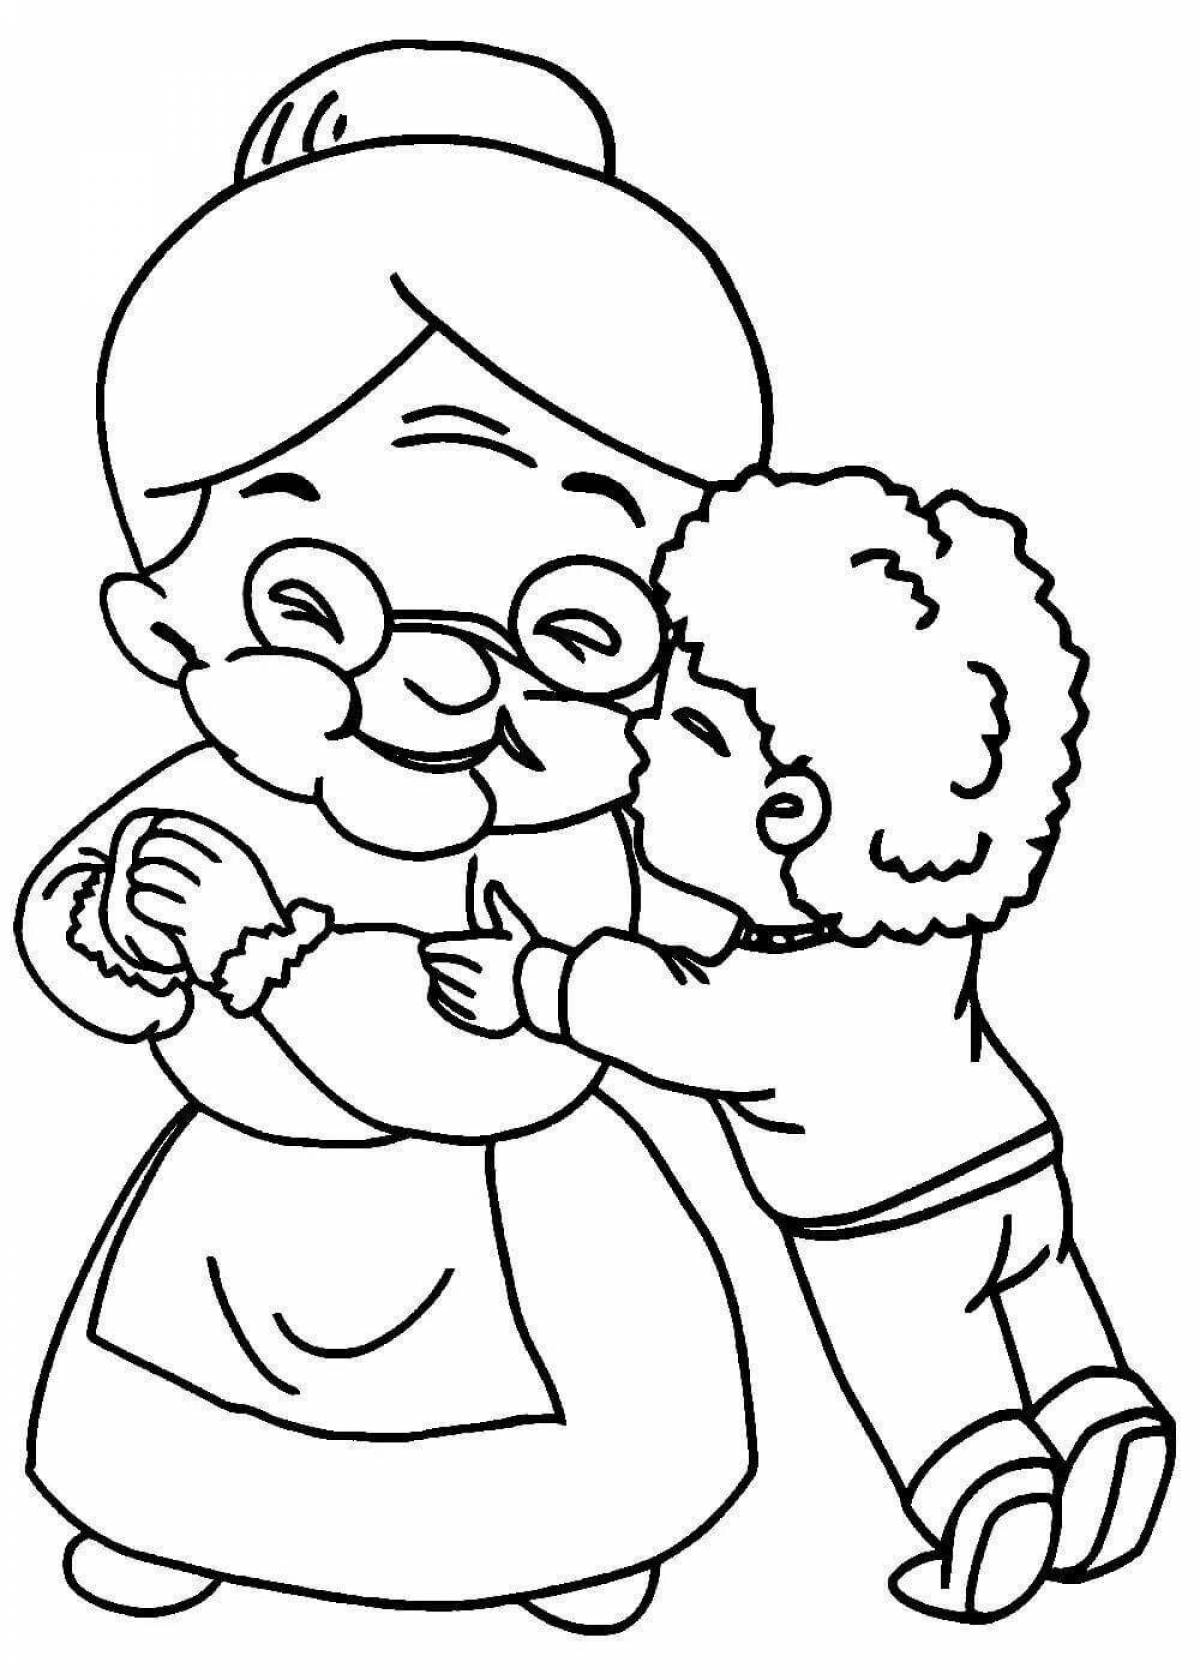 Glorious grandparents coloring pages for kids